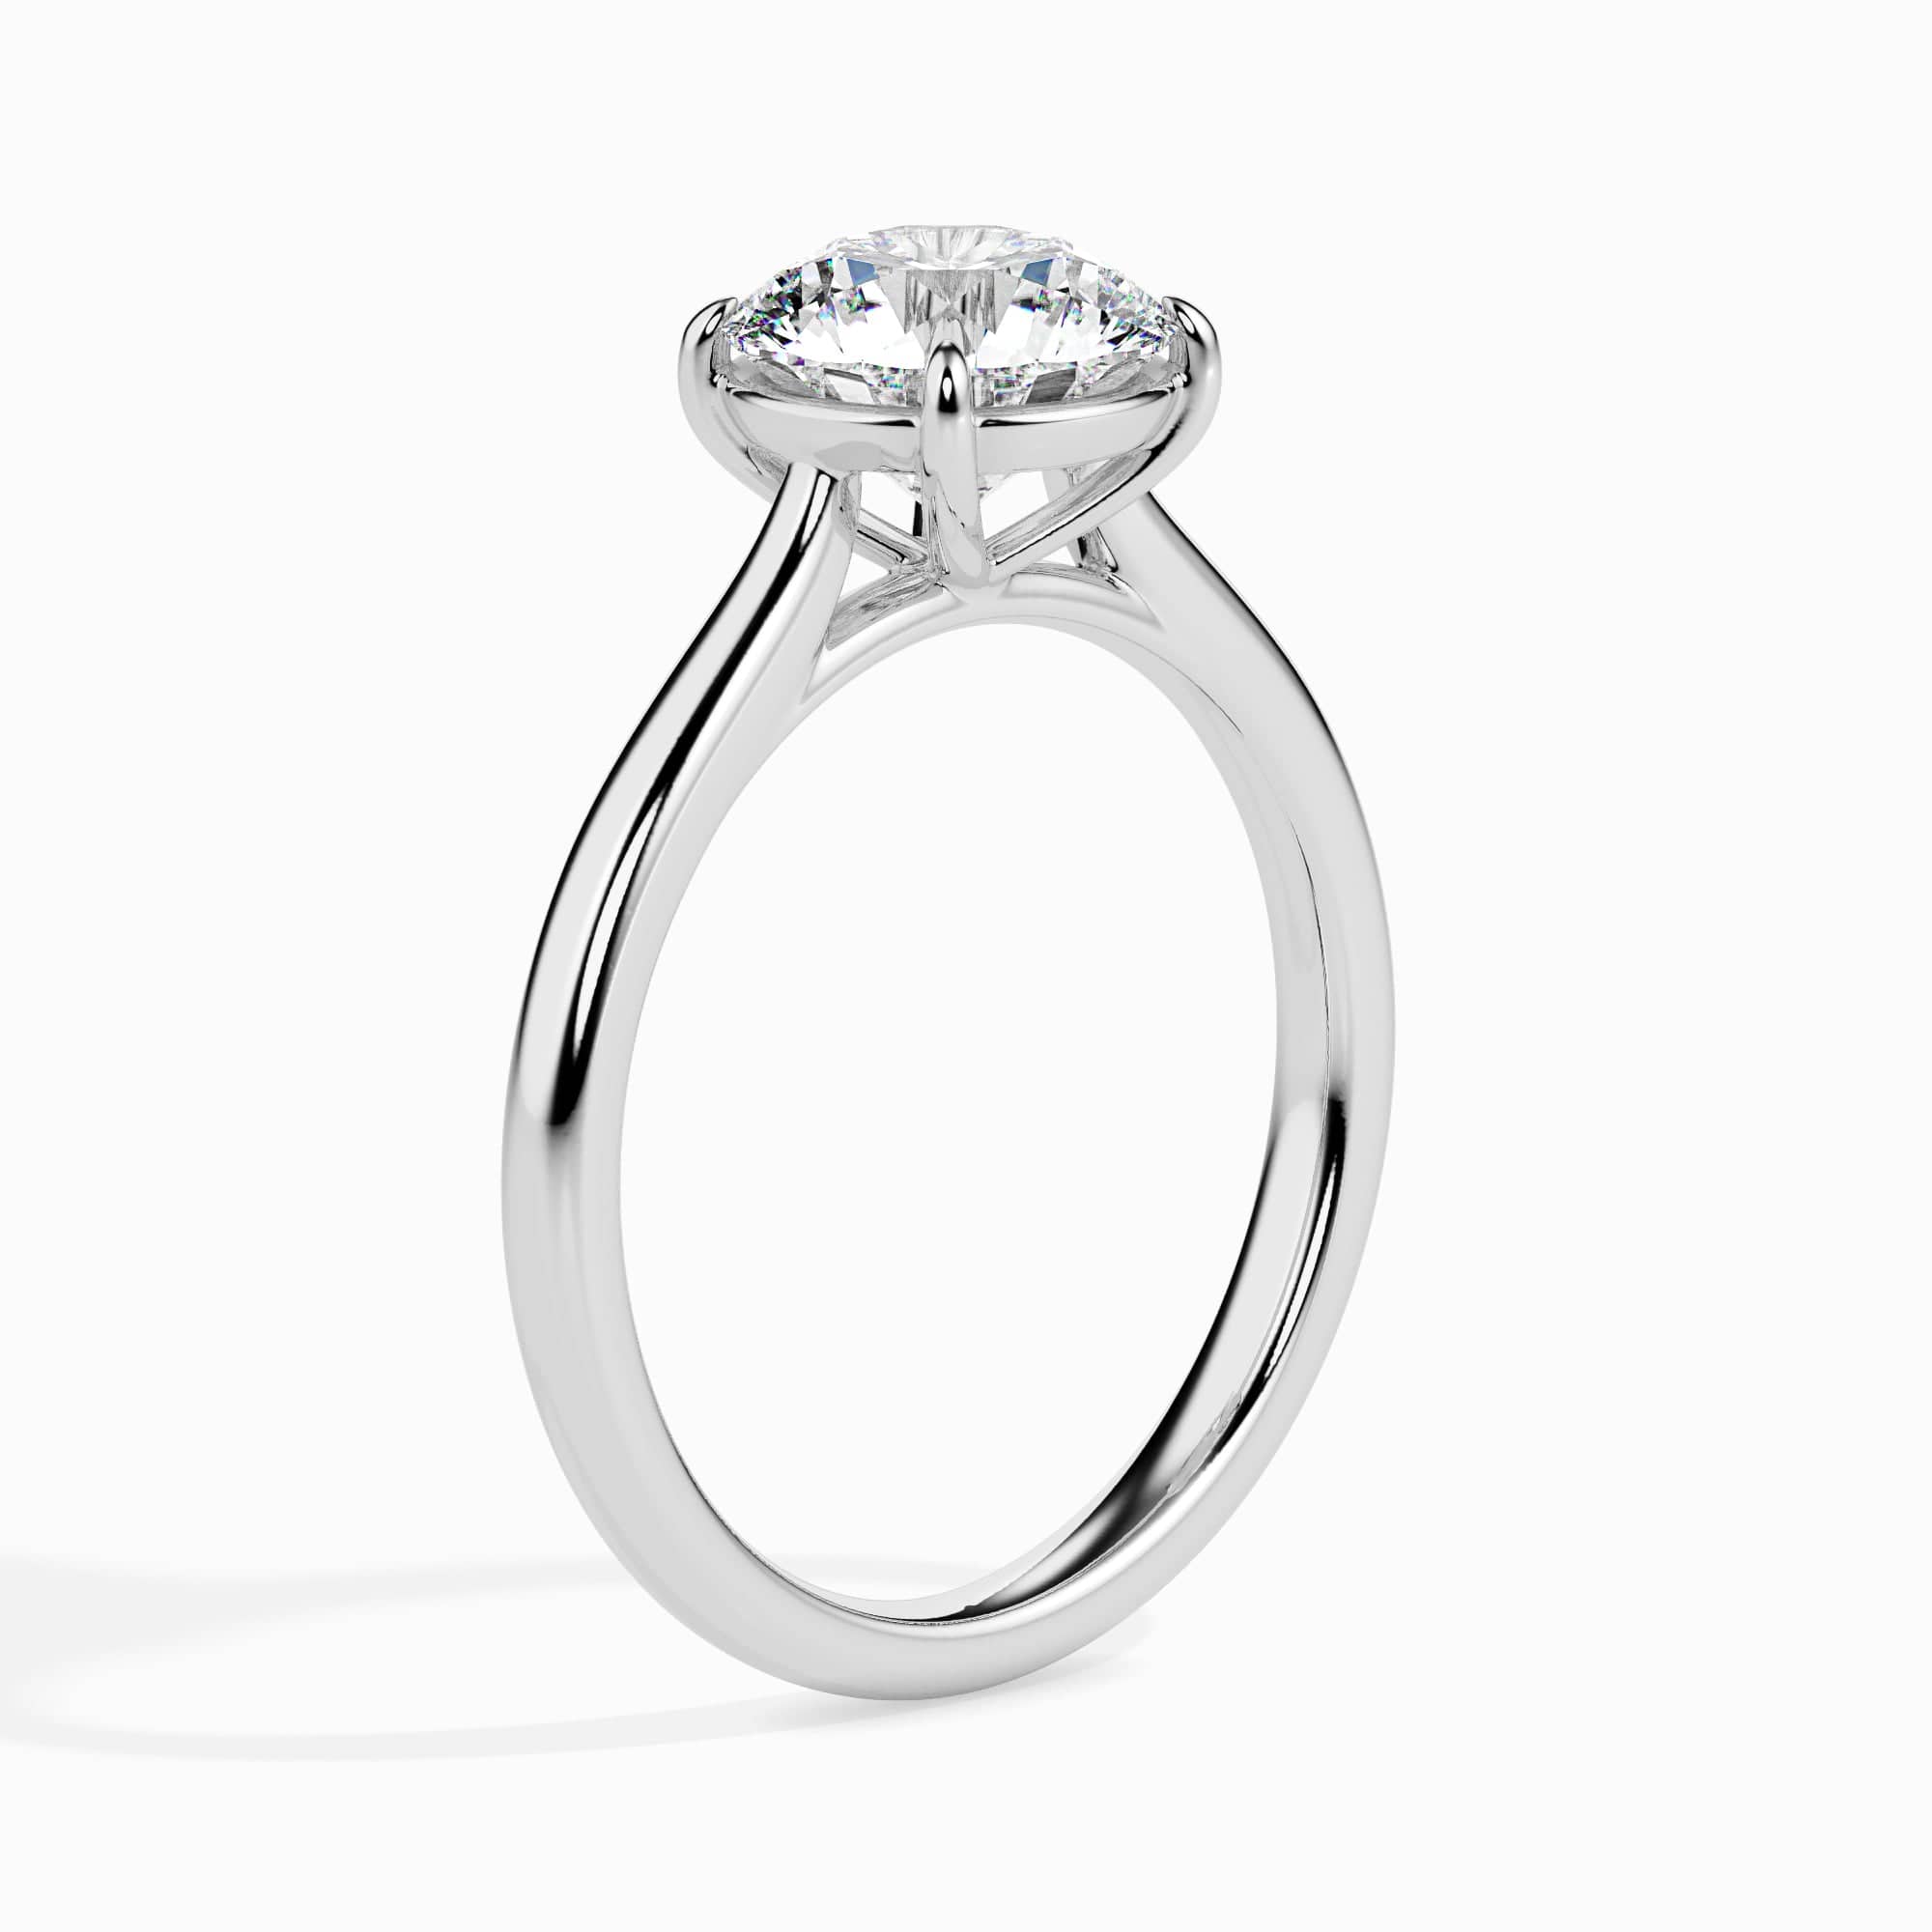 TIFFANY ENGAGEMENT RING - Why Tiffany costs more and how to find a ring in  your budget - YouTube